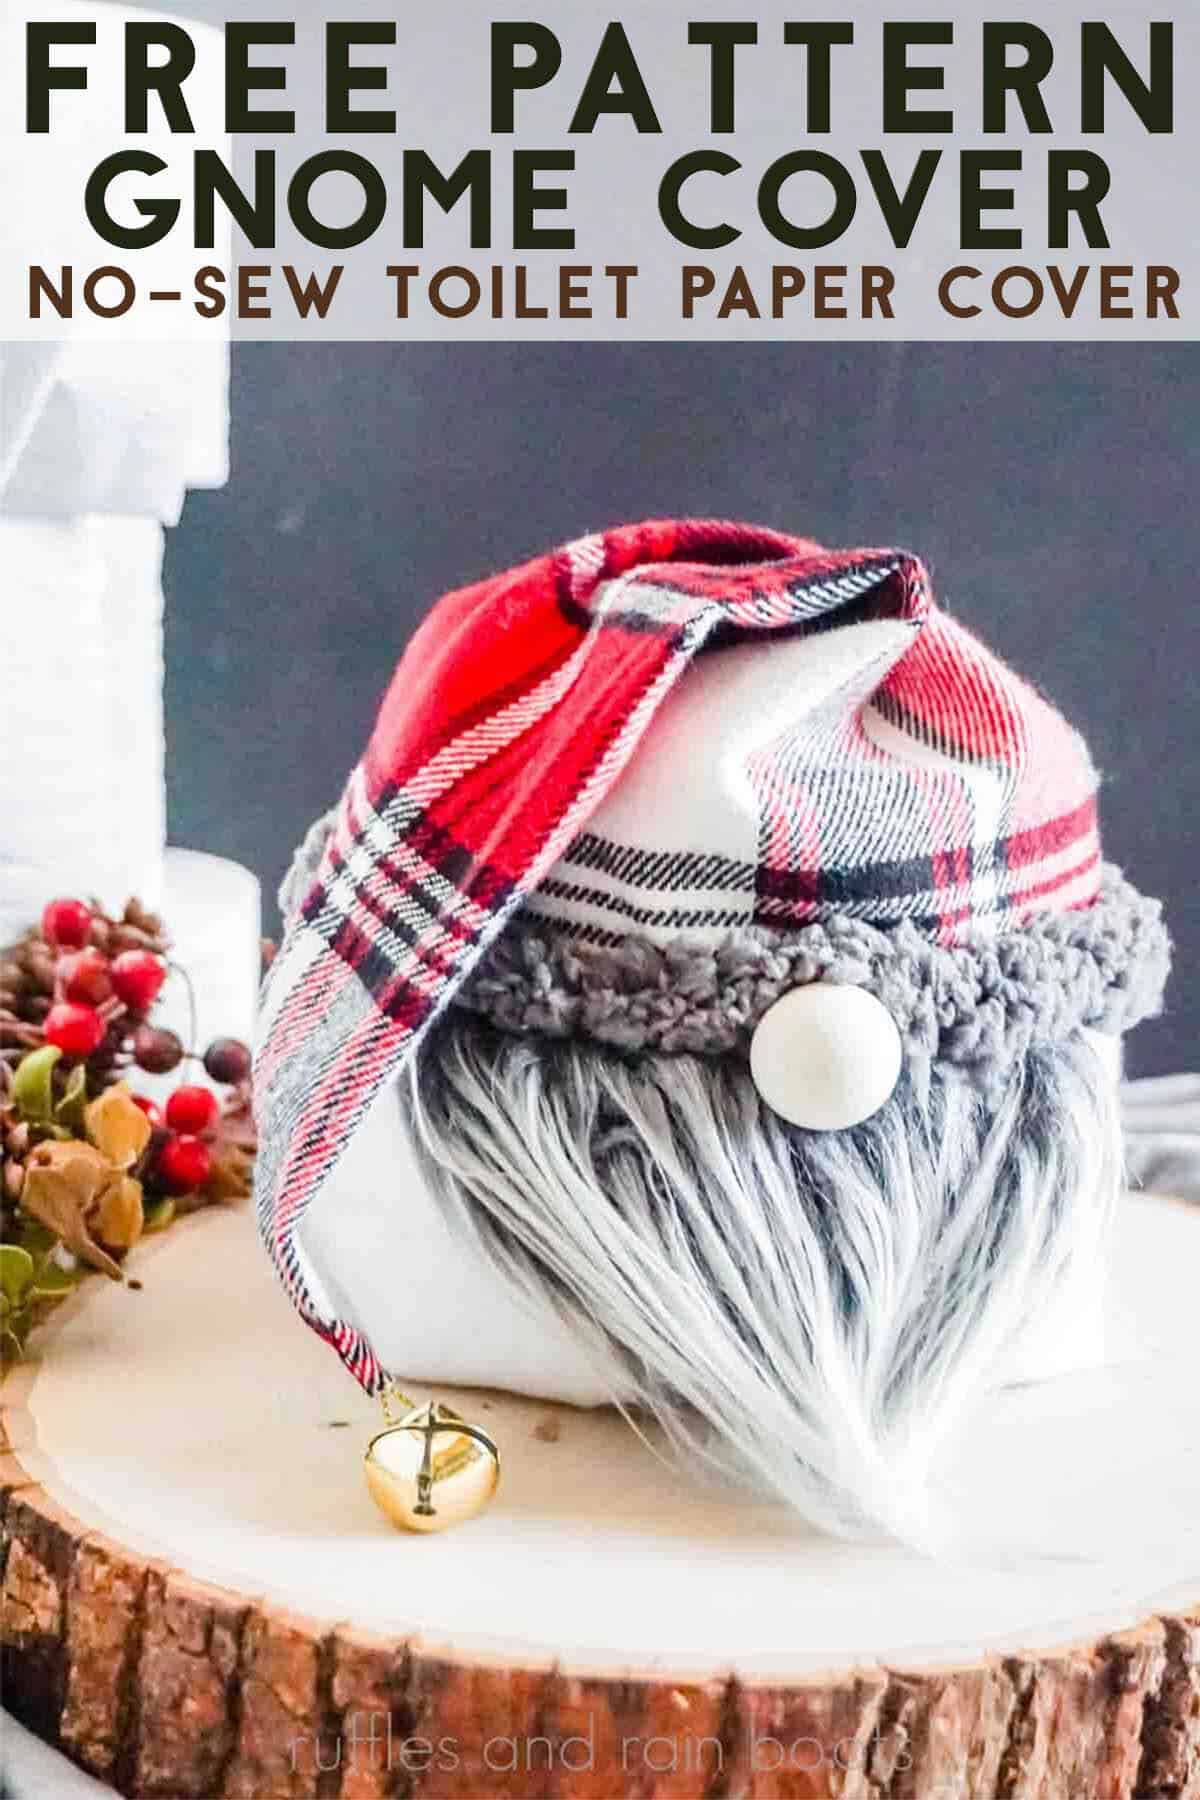 Vertical image of a toilet paper cover gnome with a flannel hat and gray and white beard on a wood slice with text which reads free pattern gnome cover.